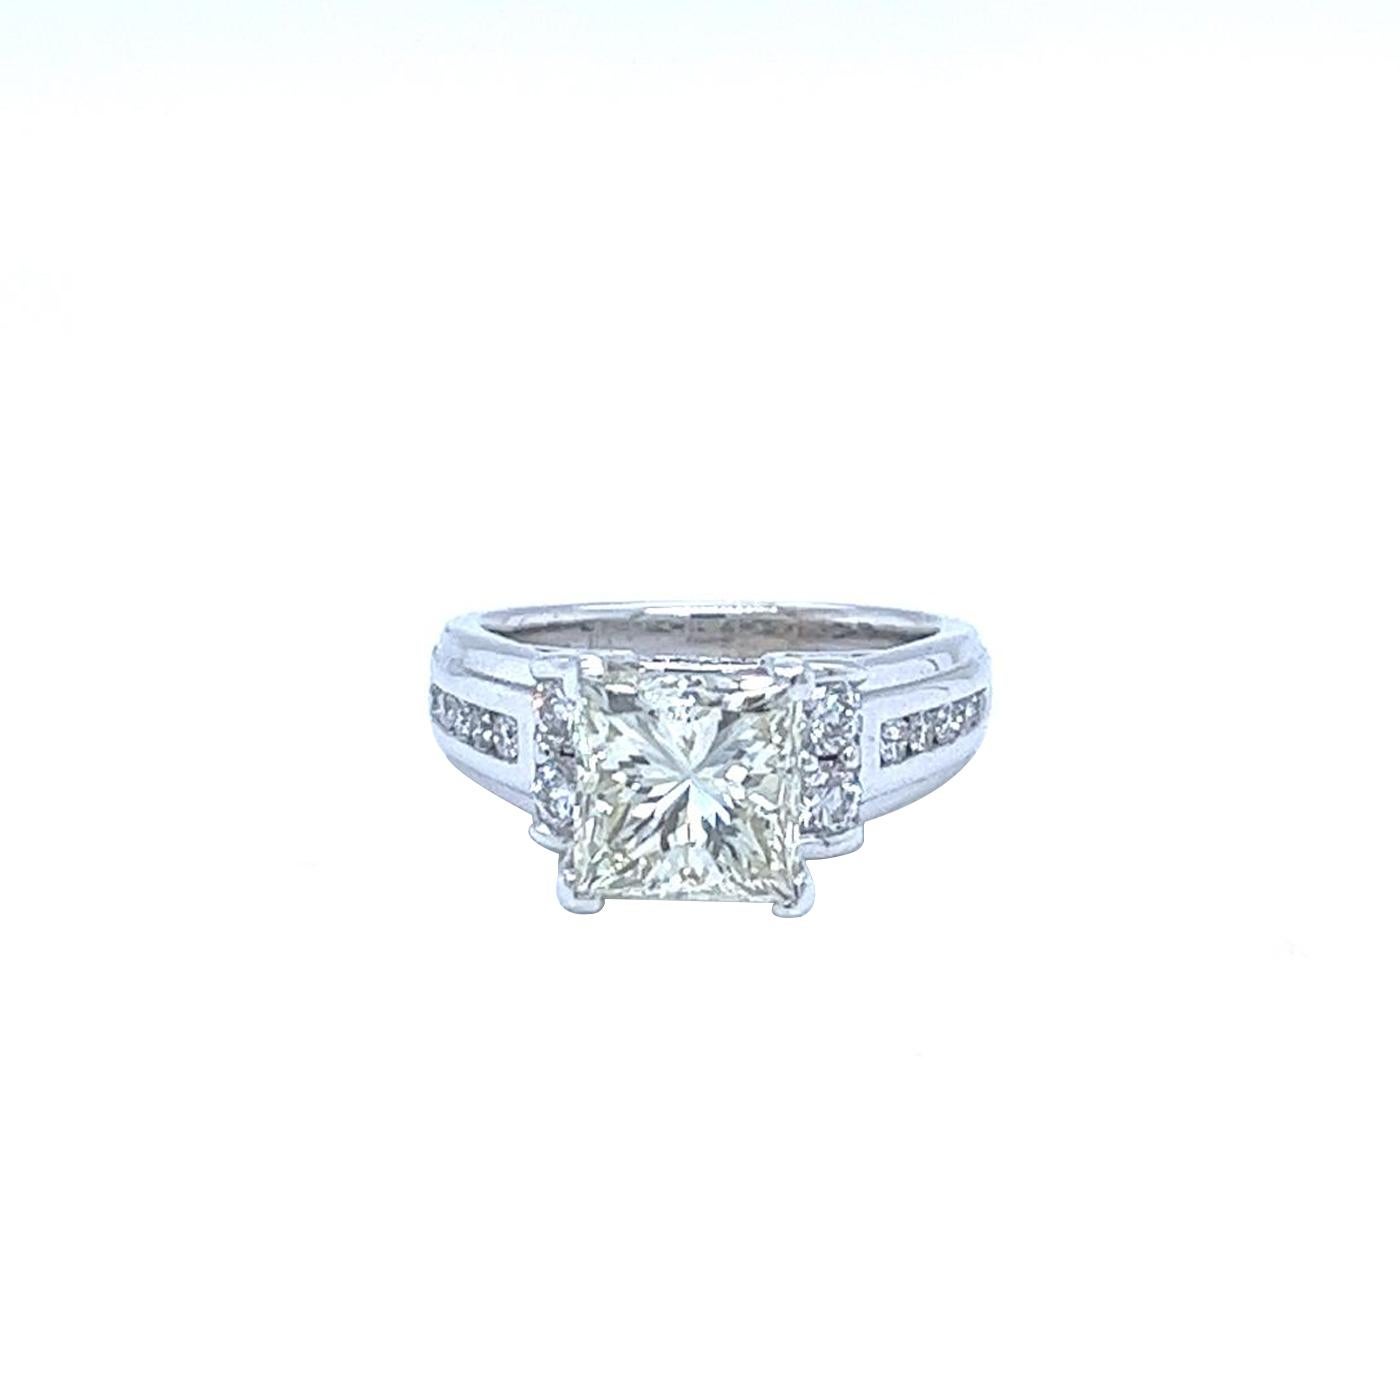 This dazzling 2.65 Natural Princess Cut Diamond Engagement Ring in 14k White Gold is a dream come true! Featuring M Color and VS2 Clarity with 0.35ct pave round diamonds H color and VS1 Clarity. The diamond is set in a classic four-prong, Bright